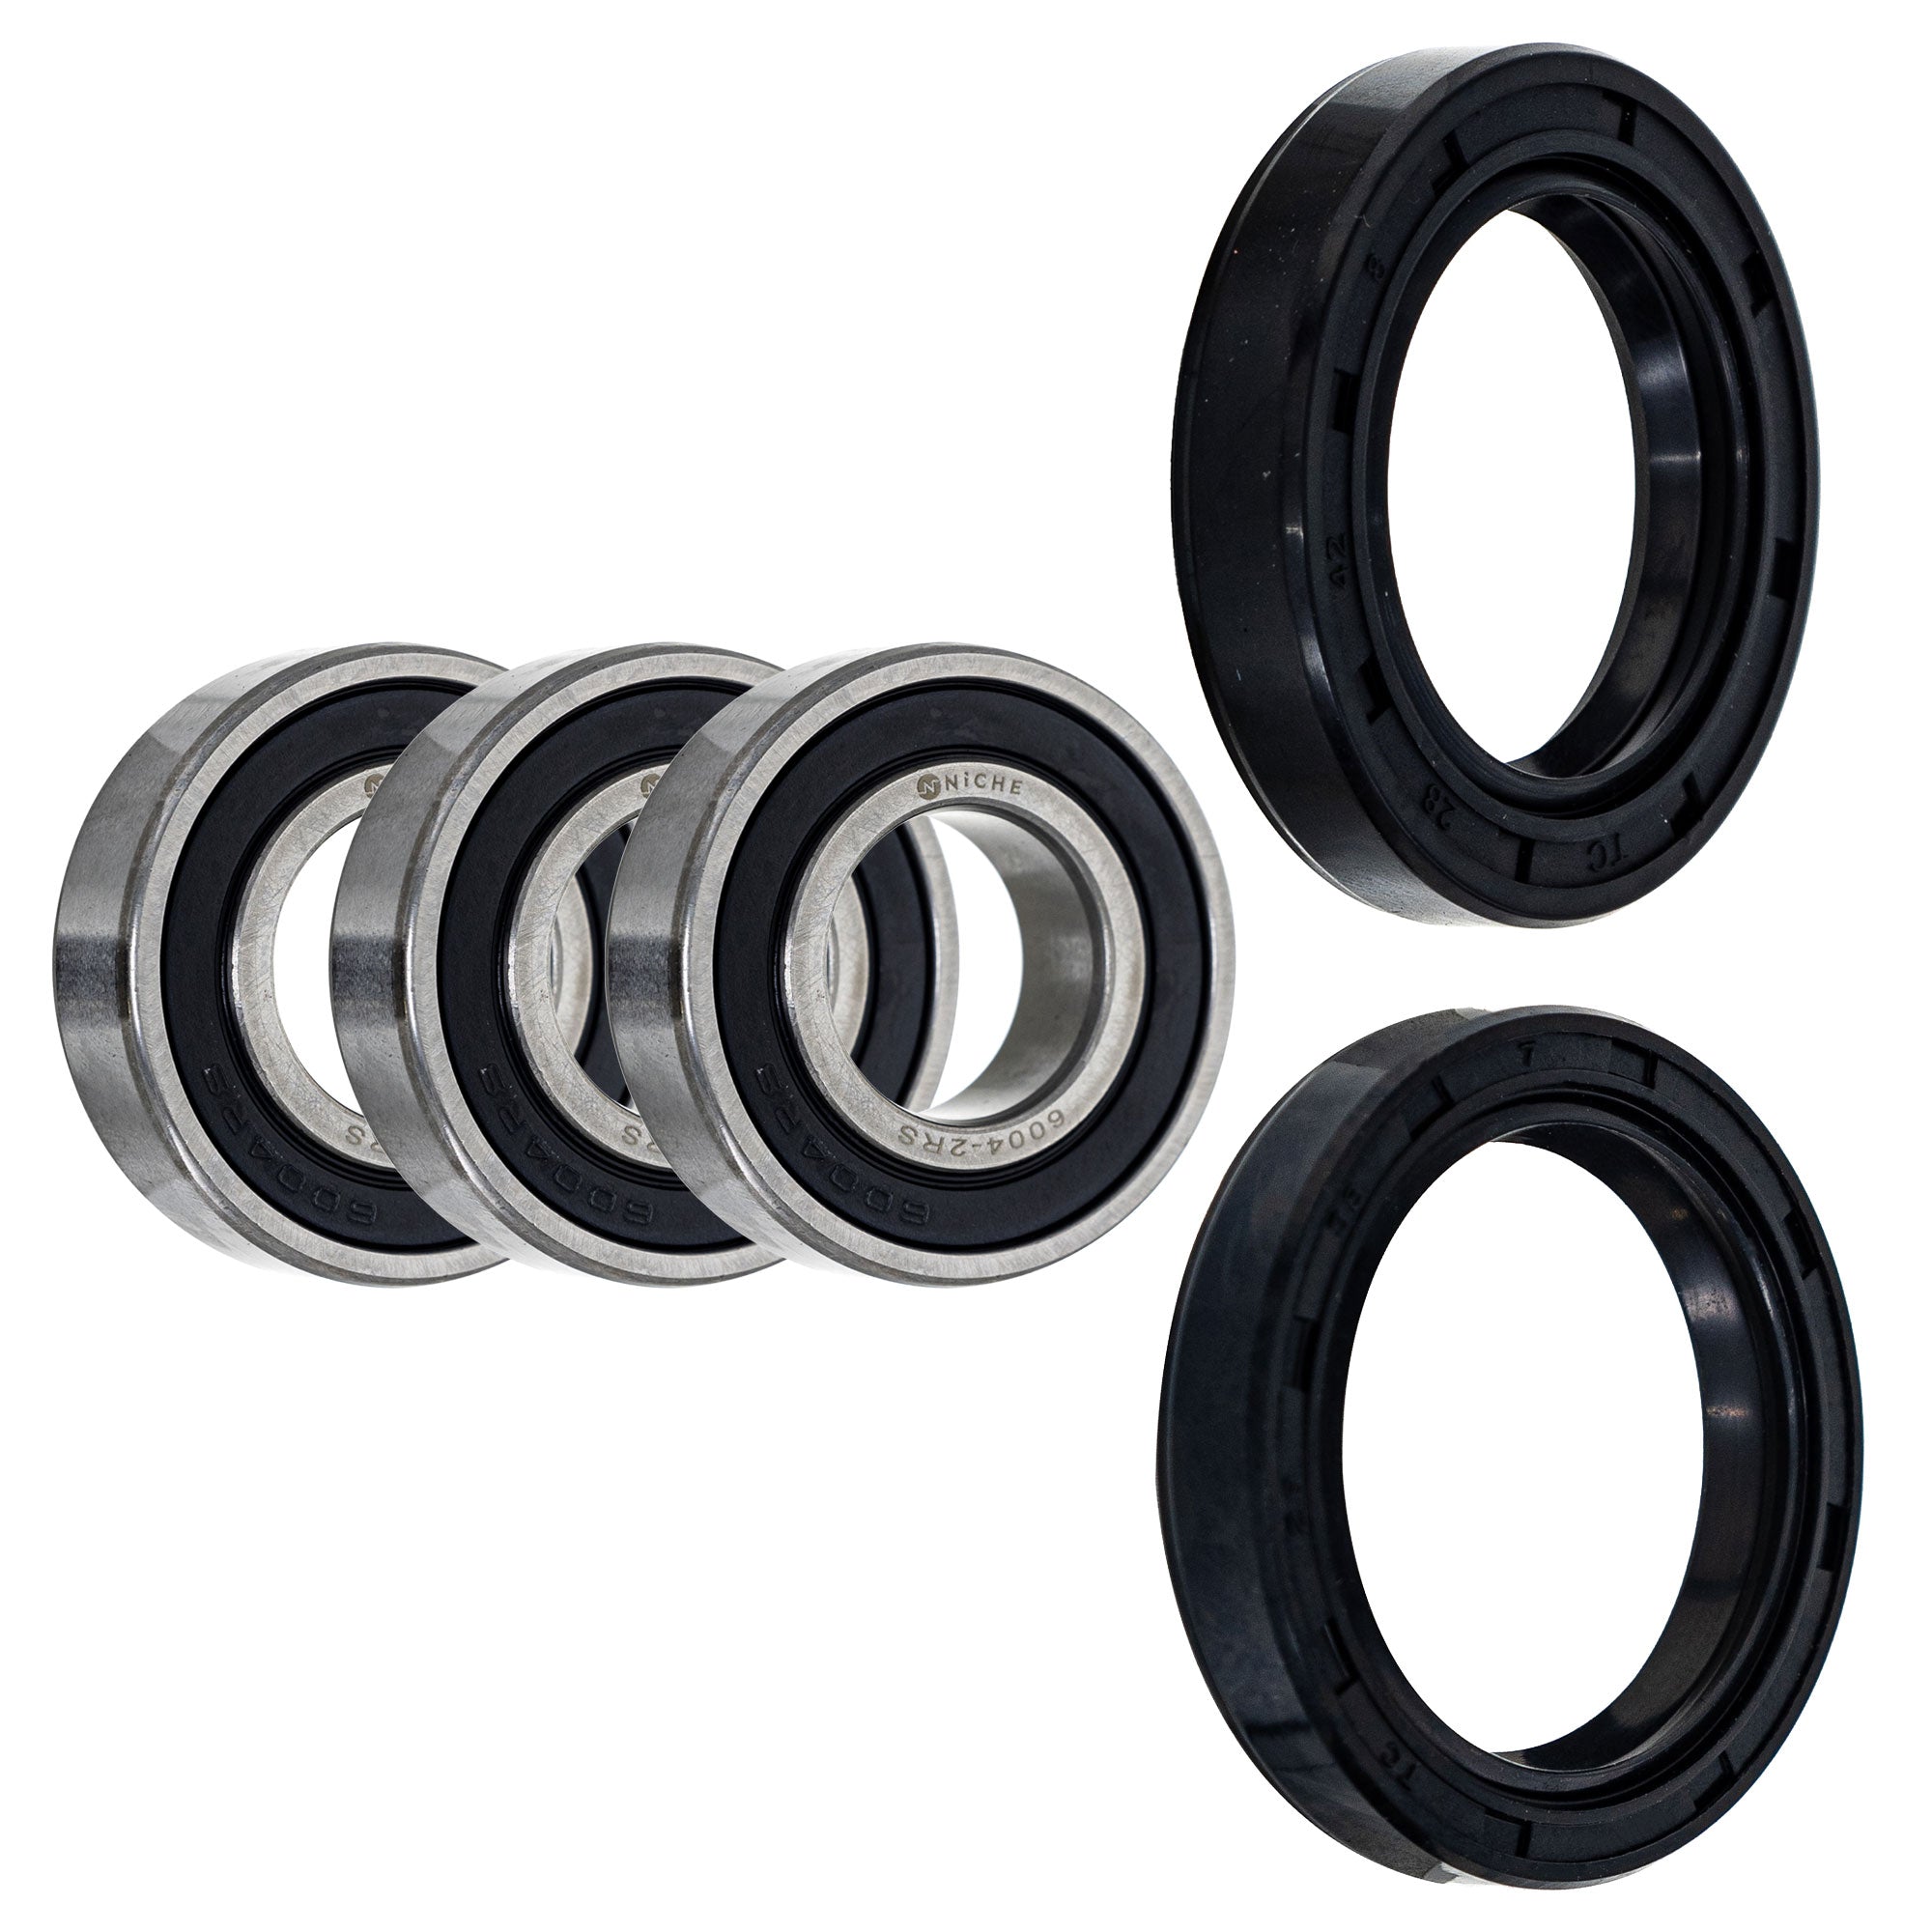 Wheel Bearing Seal Kit for zOTHER Ref No CR500R CR250R CR125R NICHE MK1008966